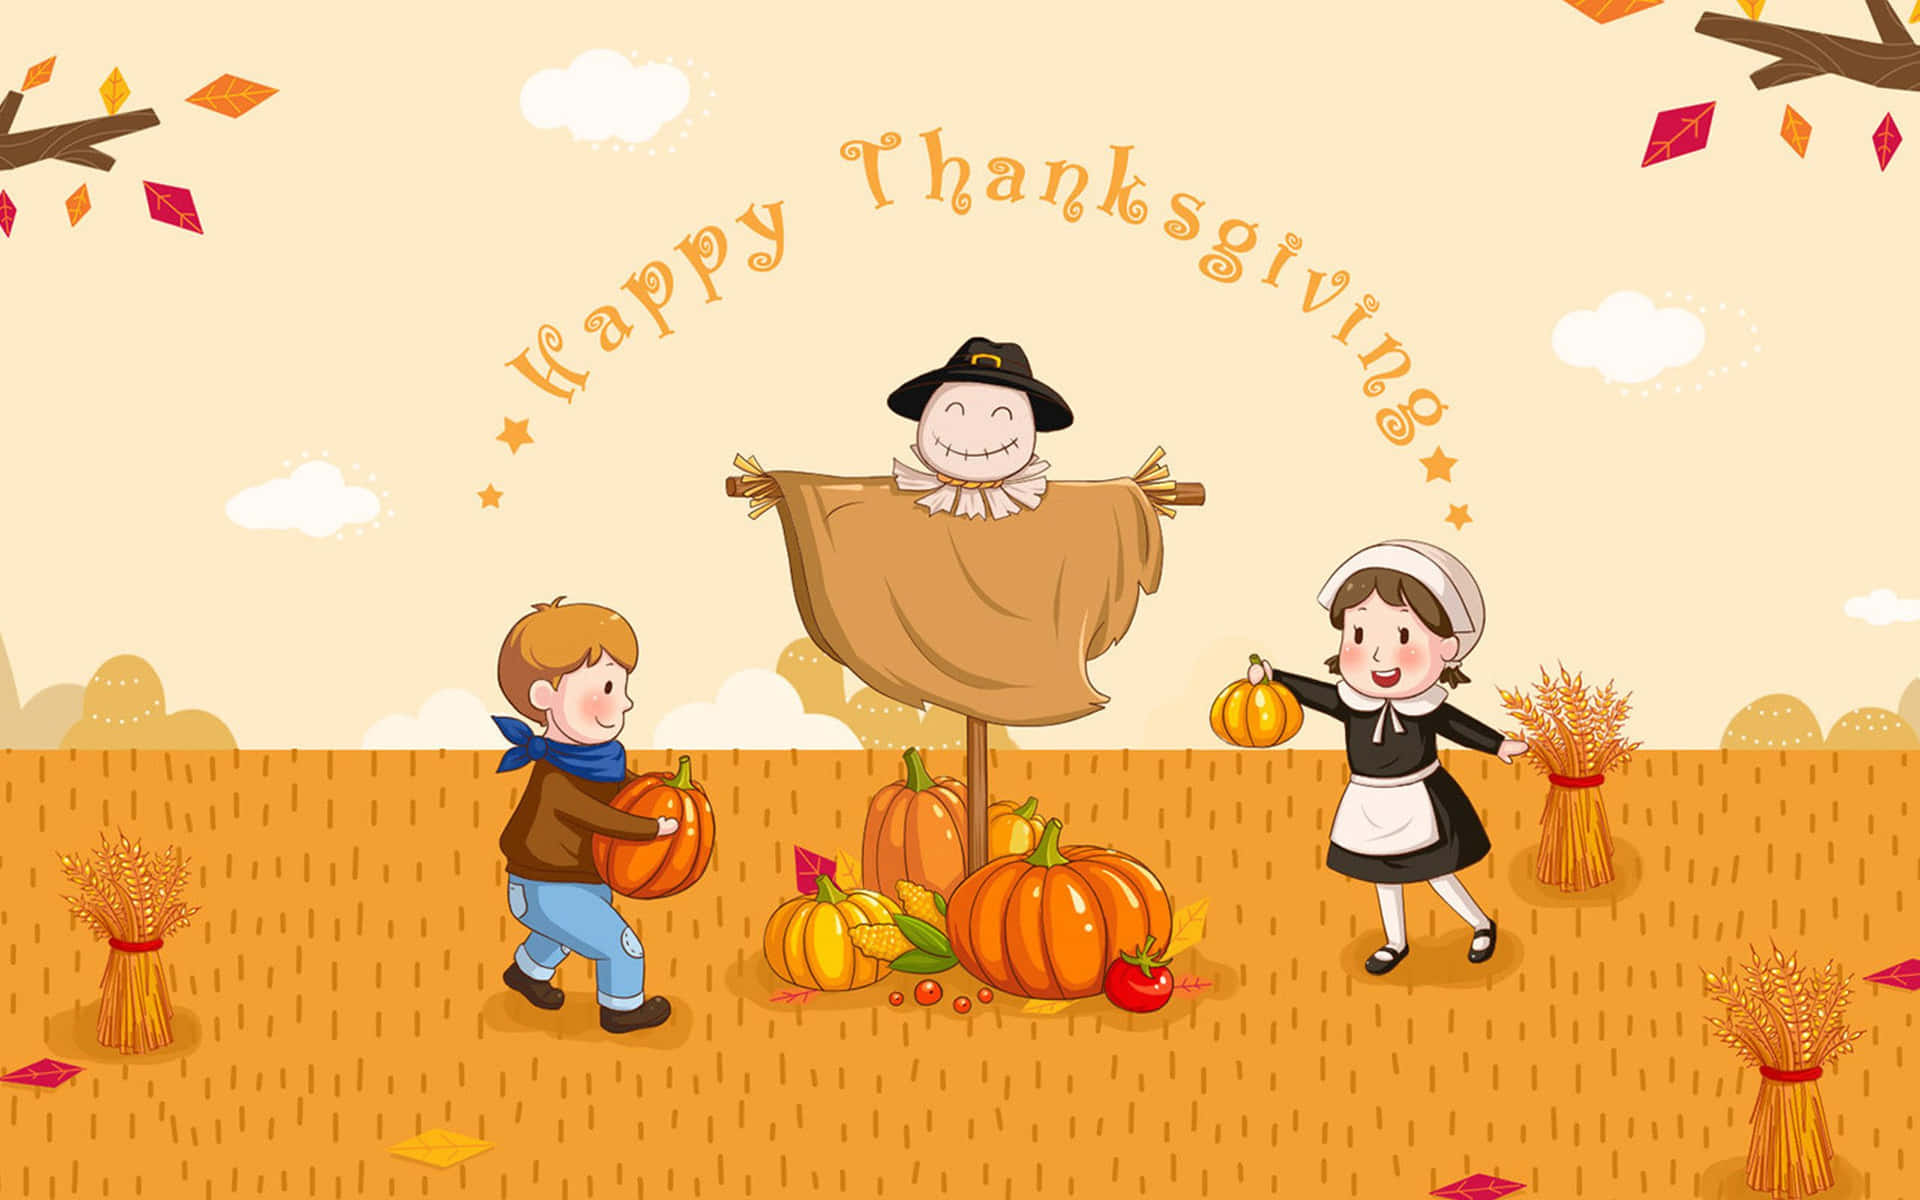 "Let's give thanks for another Thanksgiving!" Wallpaper